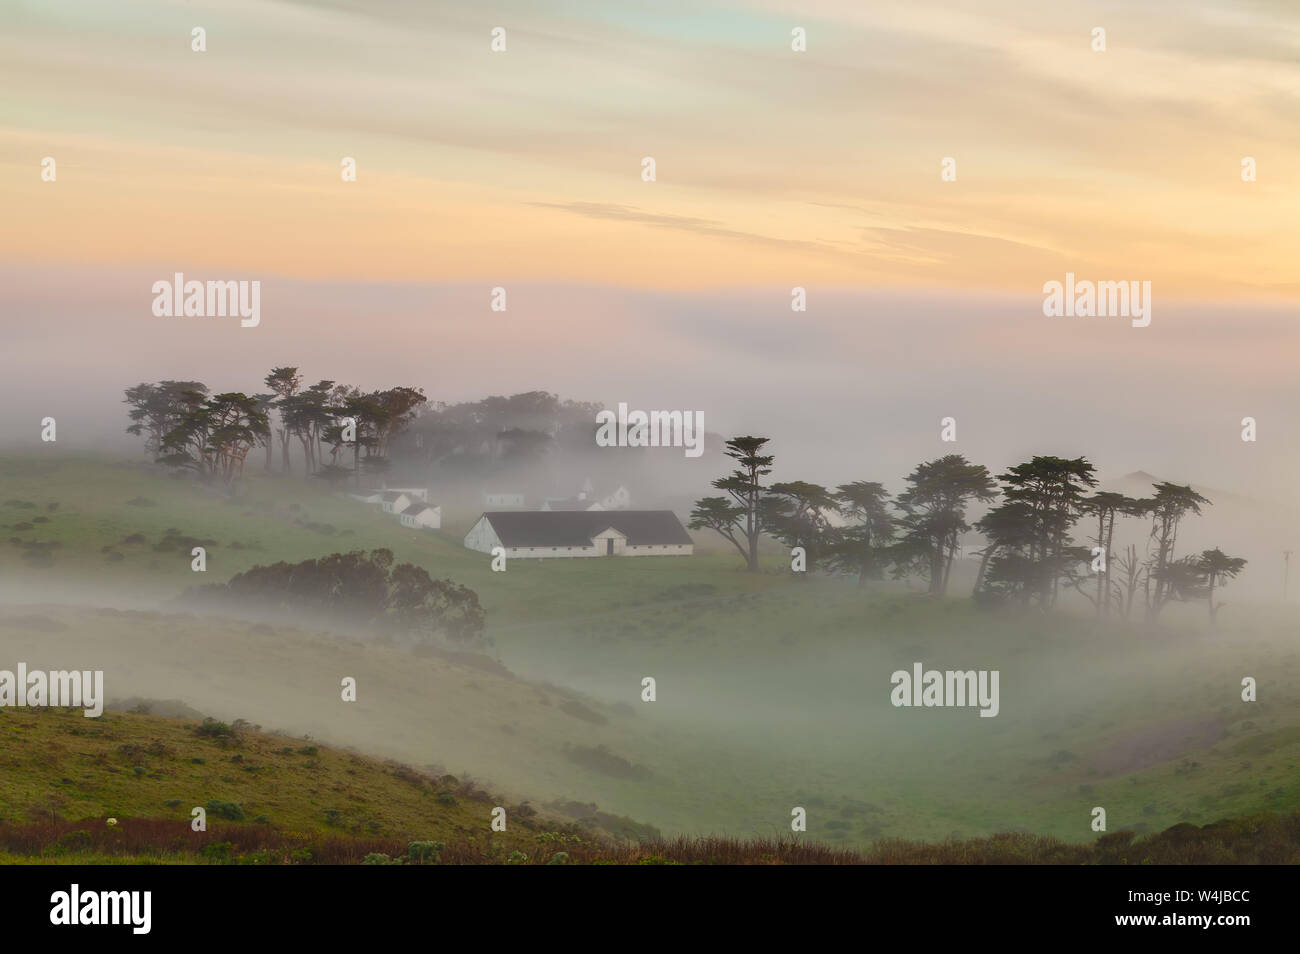 View of the historic Pierce Point Ranch covers in fog at sunrise in Point Reyes National Seashore, California, United States. Stock Photo